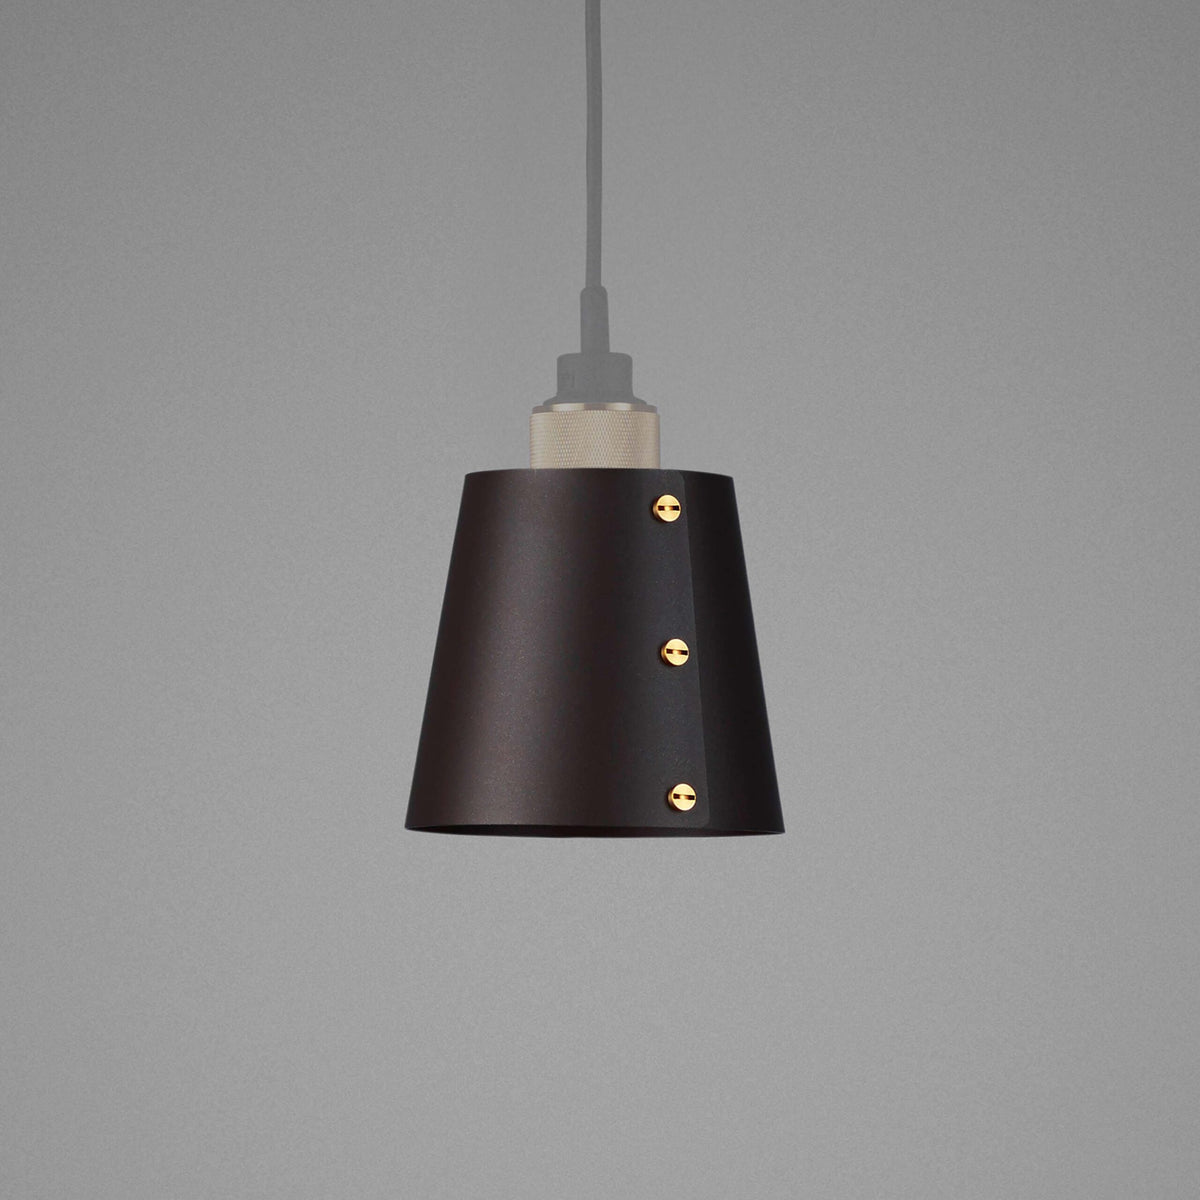 Buster + Punch - NSH-34260 - Hooked Pendant - Shade - Hooked - Graphite